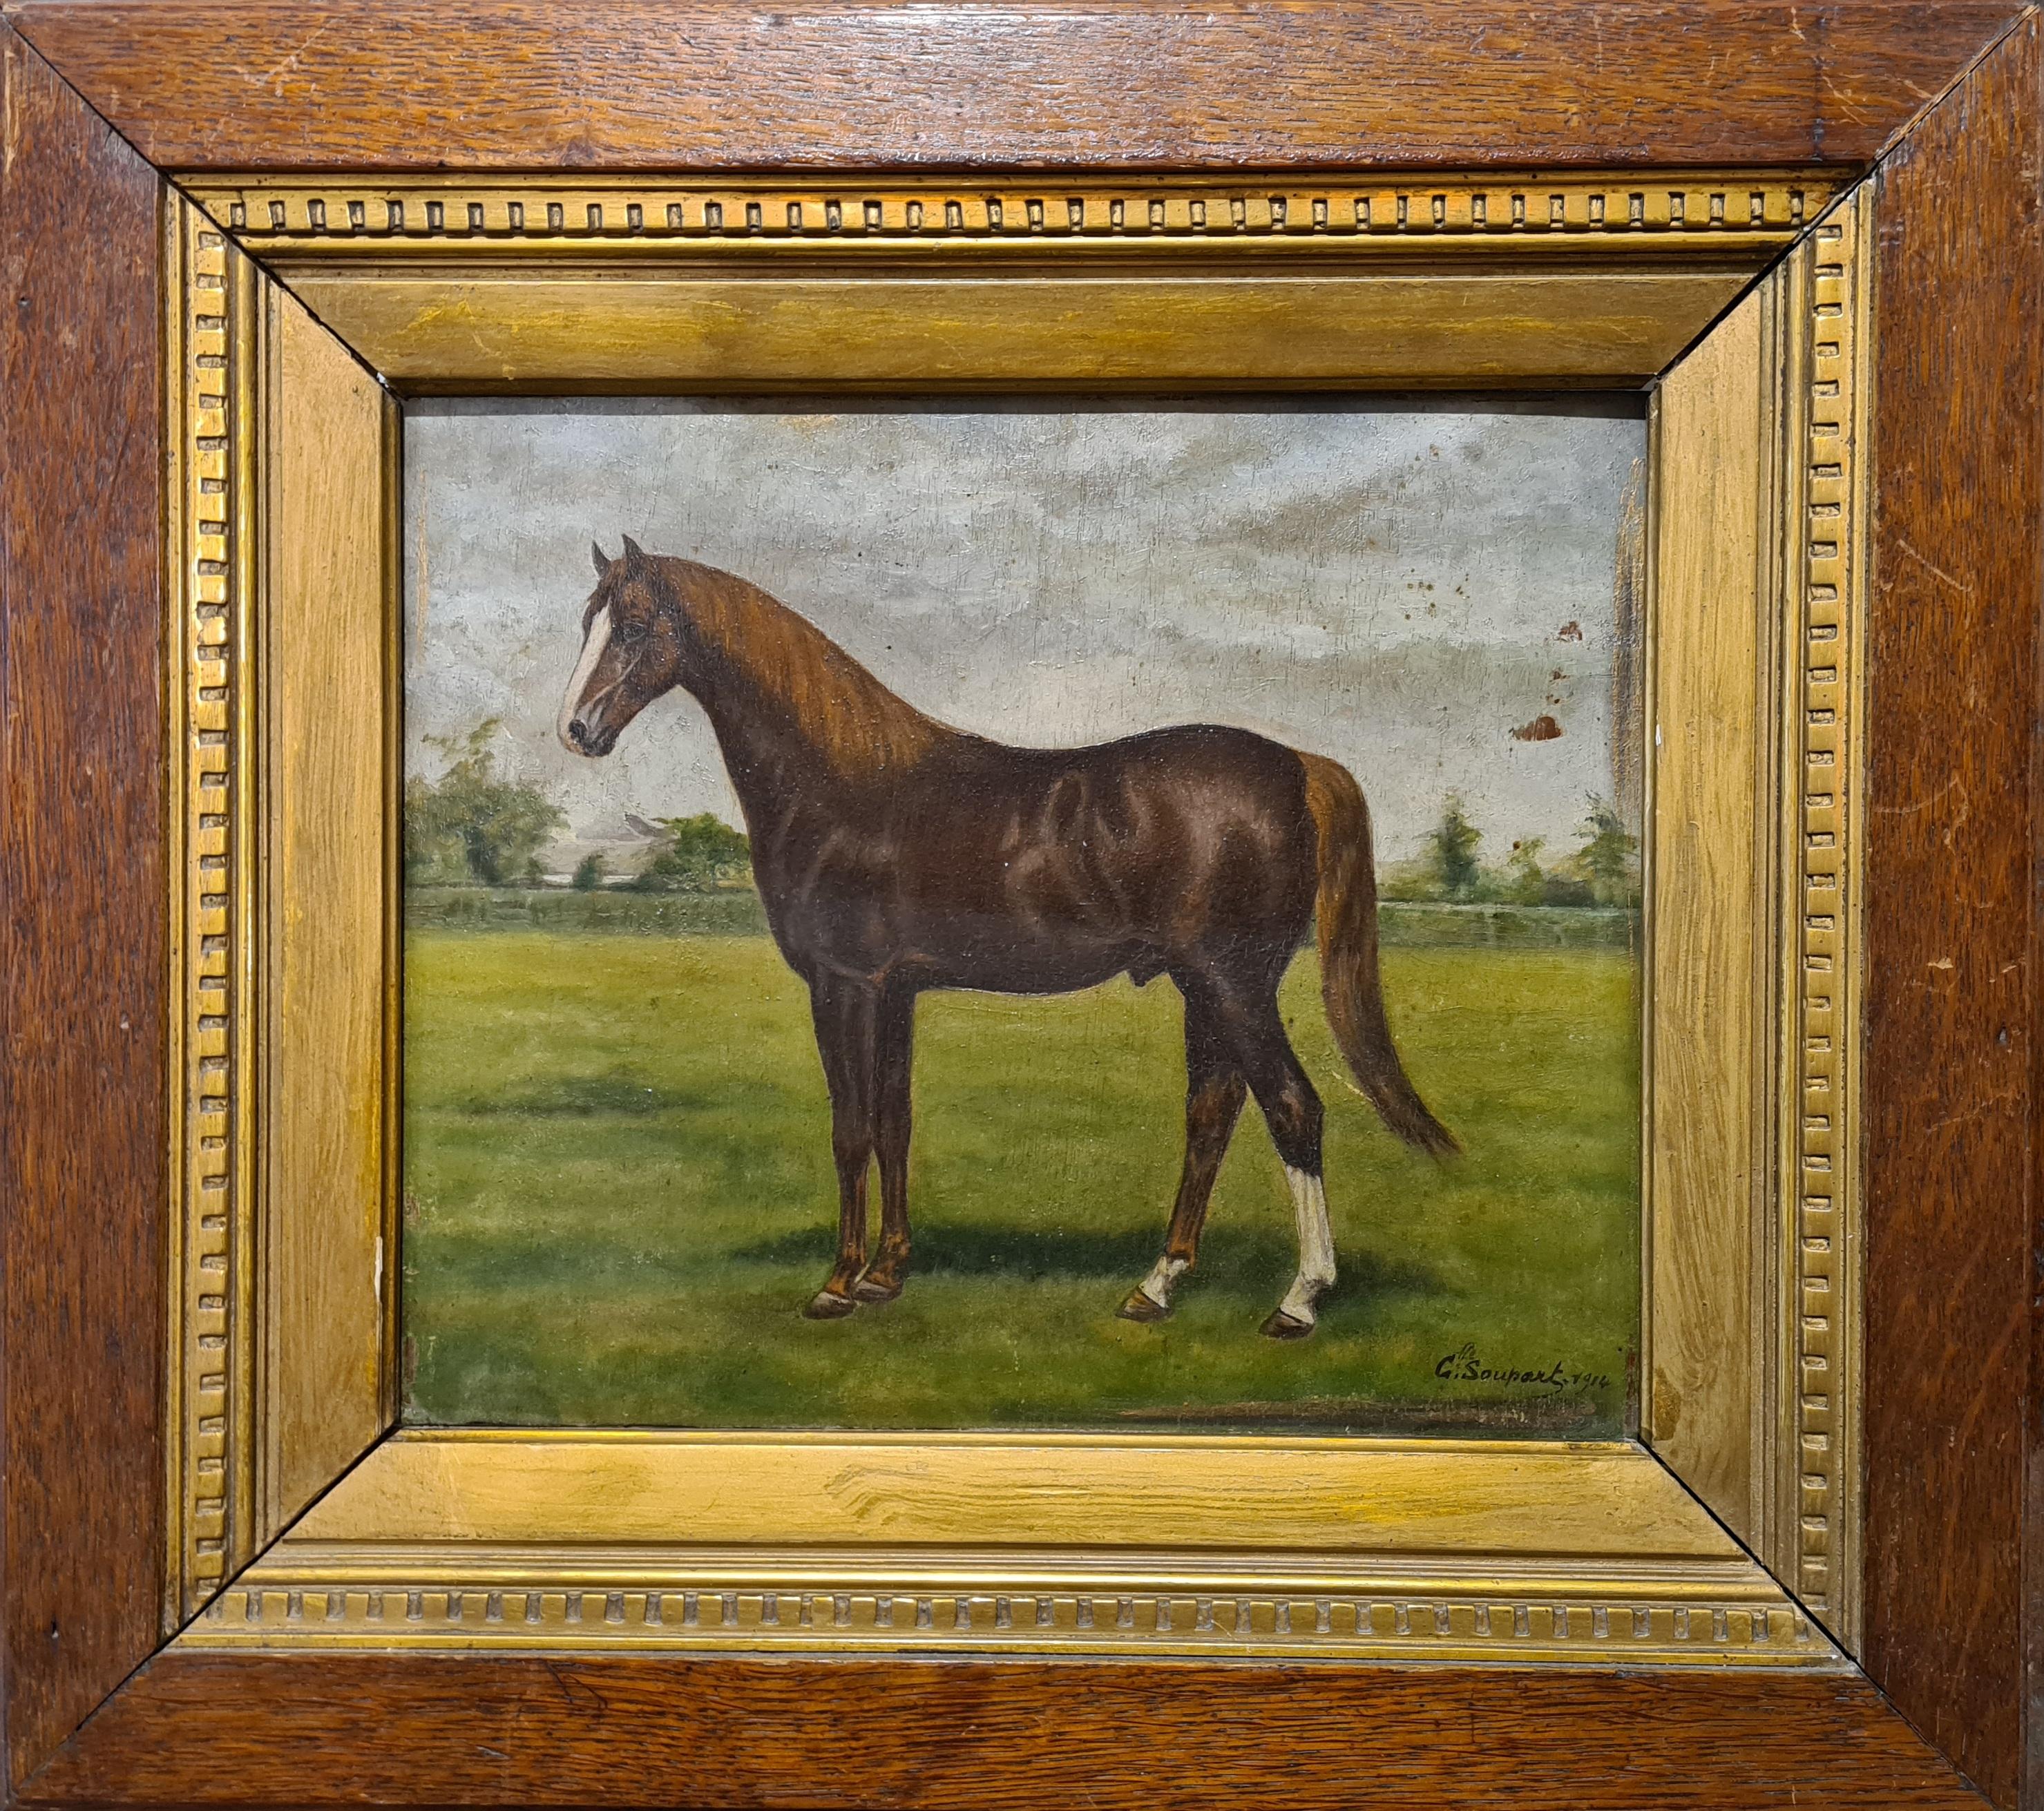 G. Soupart Animal Painting - Thoroughbred Stallion, Early 20th Century Oil on Wood Panel.